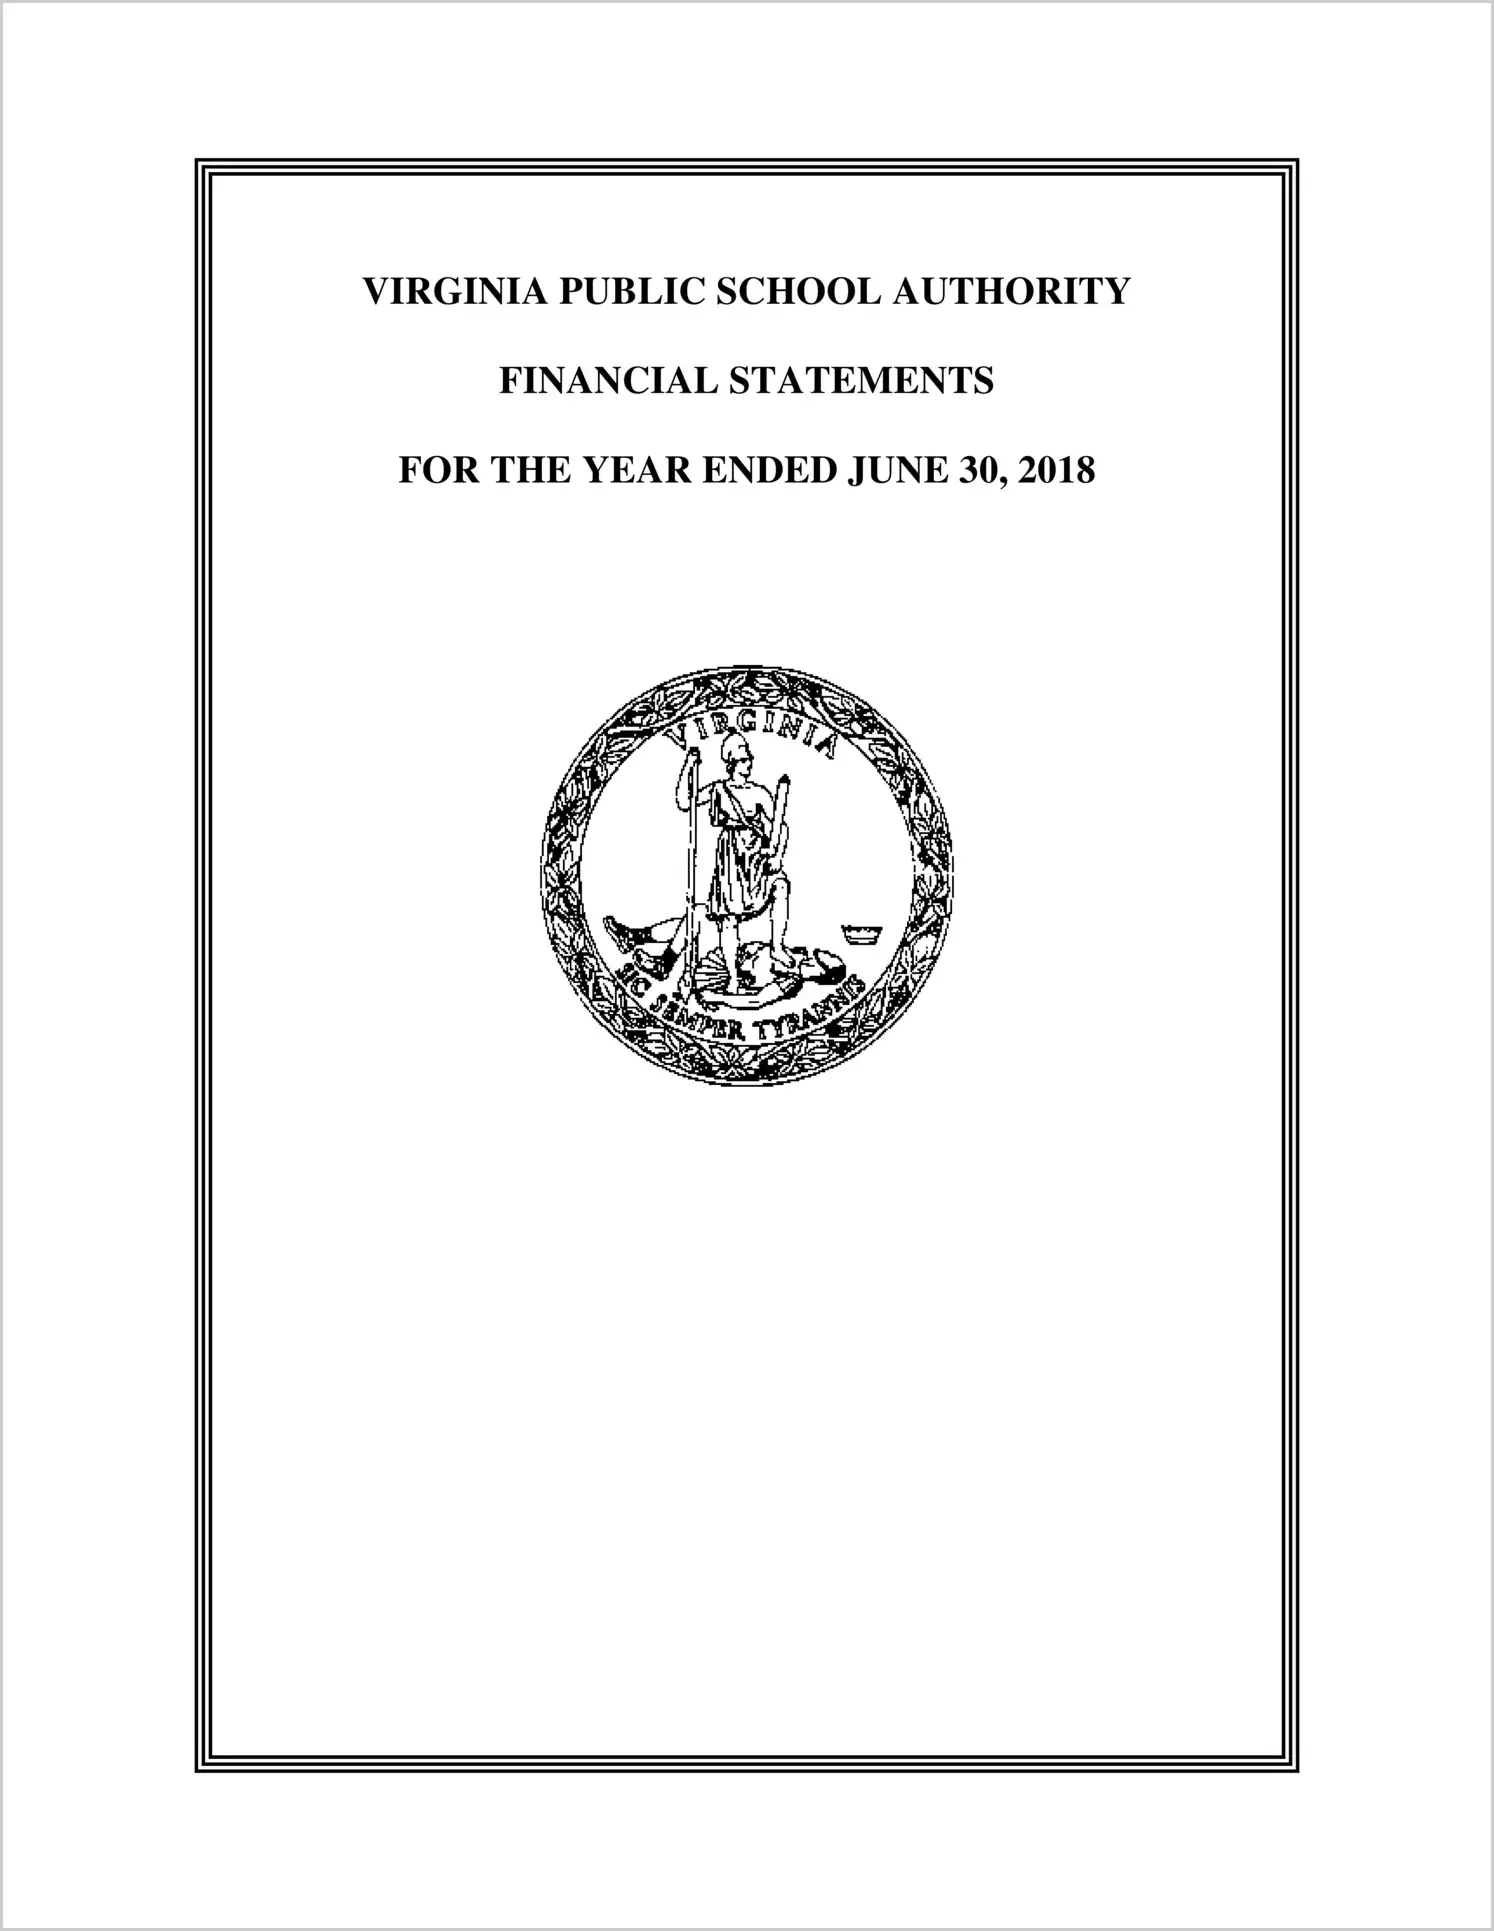 Virginia Public School Authority Financial Statements for the year ended June 30, 2018